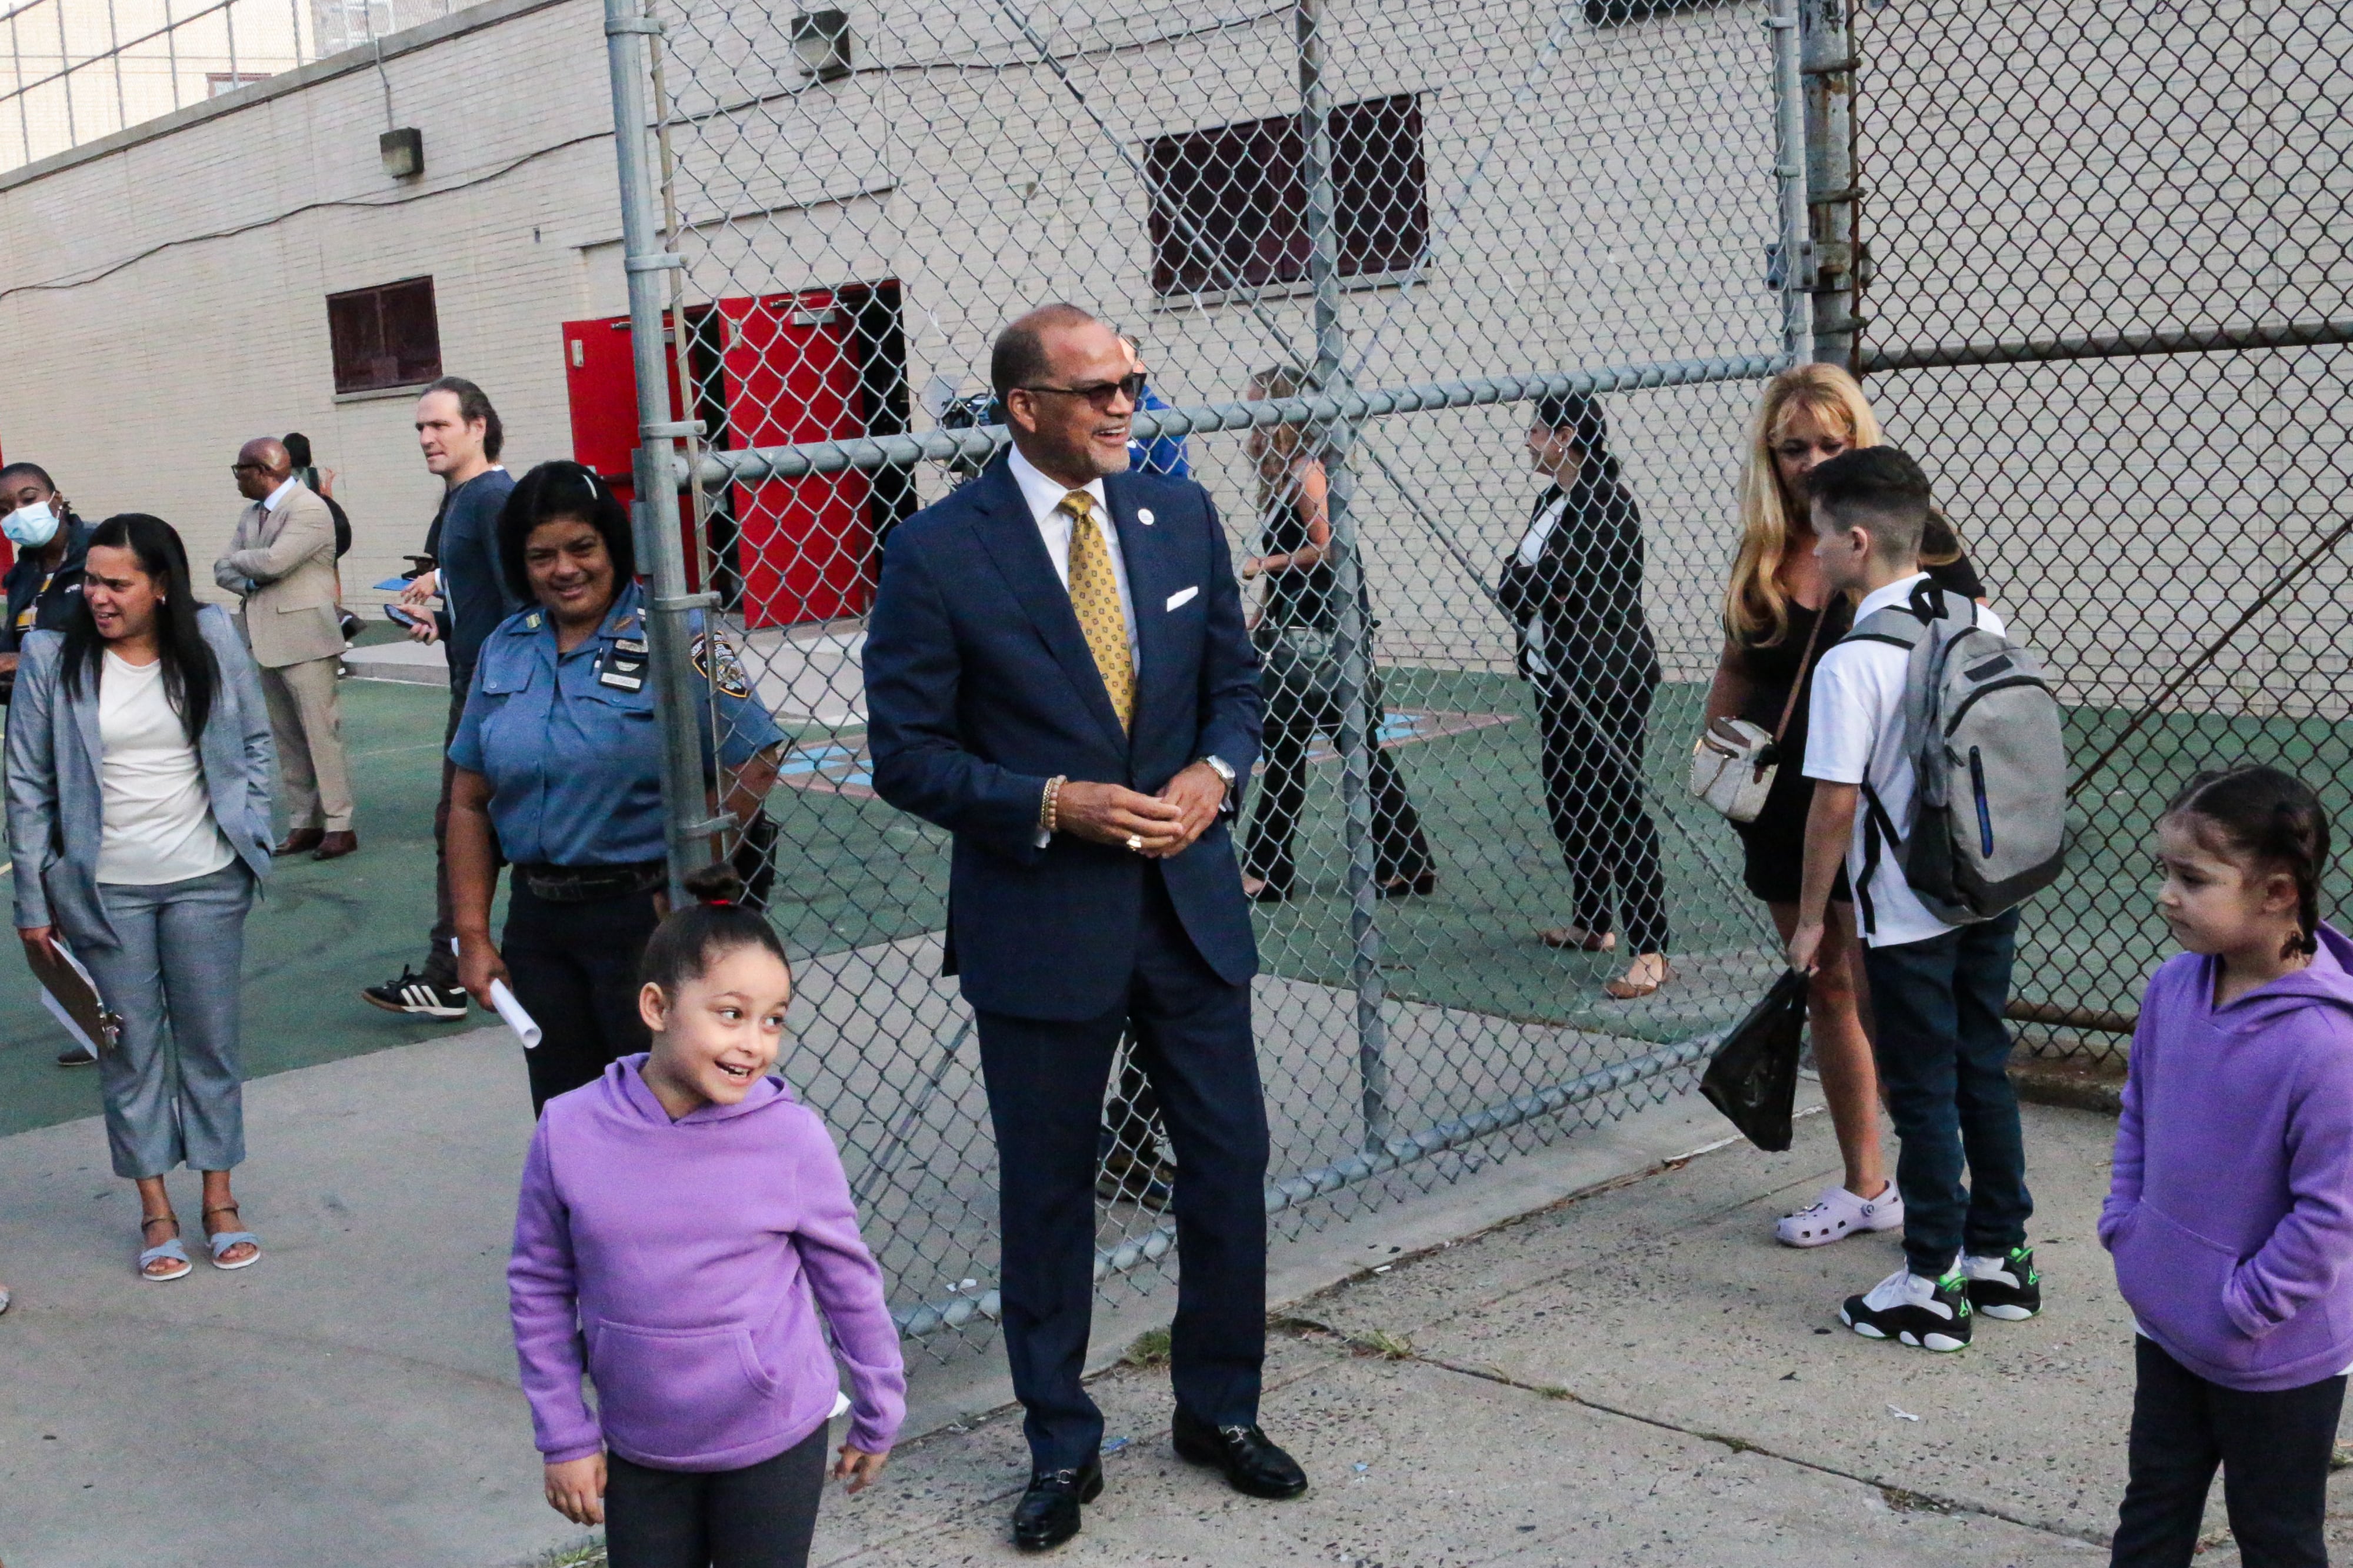 Chancellor David Banks welcomes students back on the first day of classes in NYC.